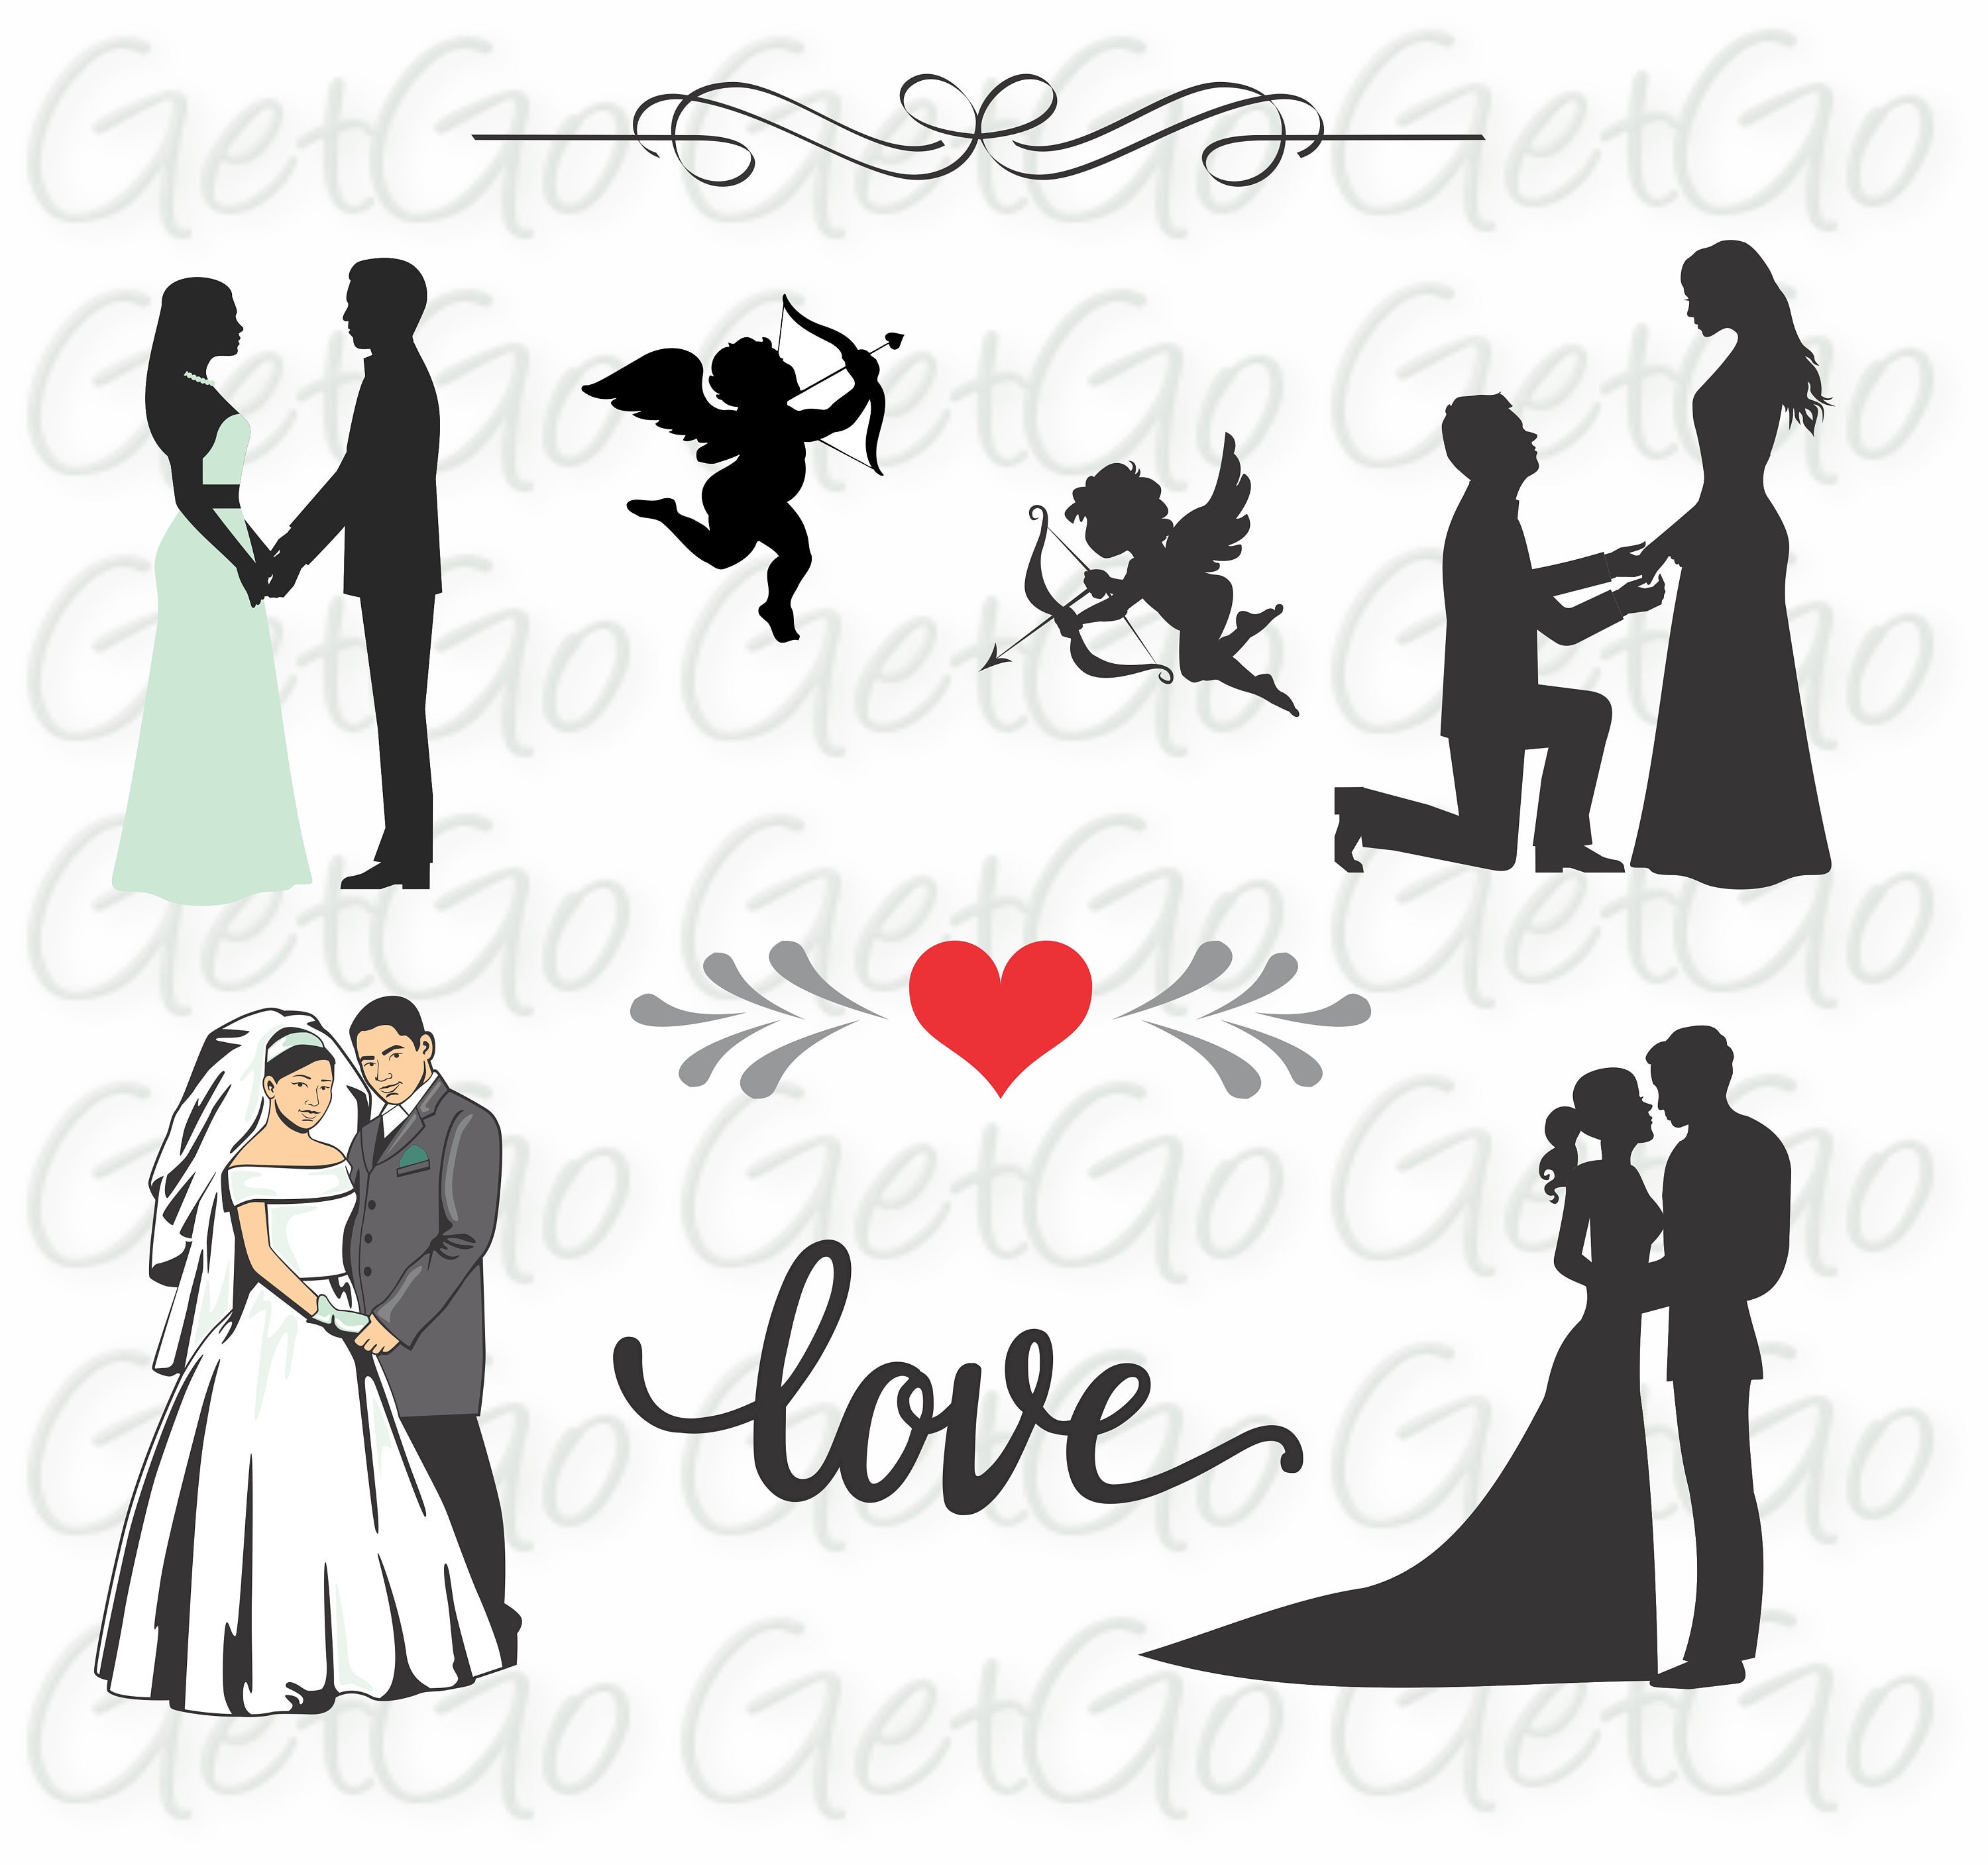 Download Wedding Icons And Bride And Groom Silhouettes Clipart Cricut Etsy